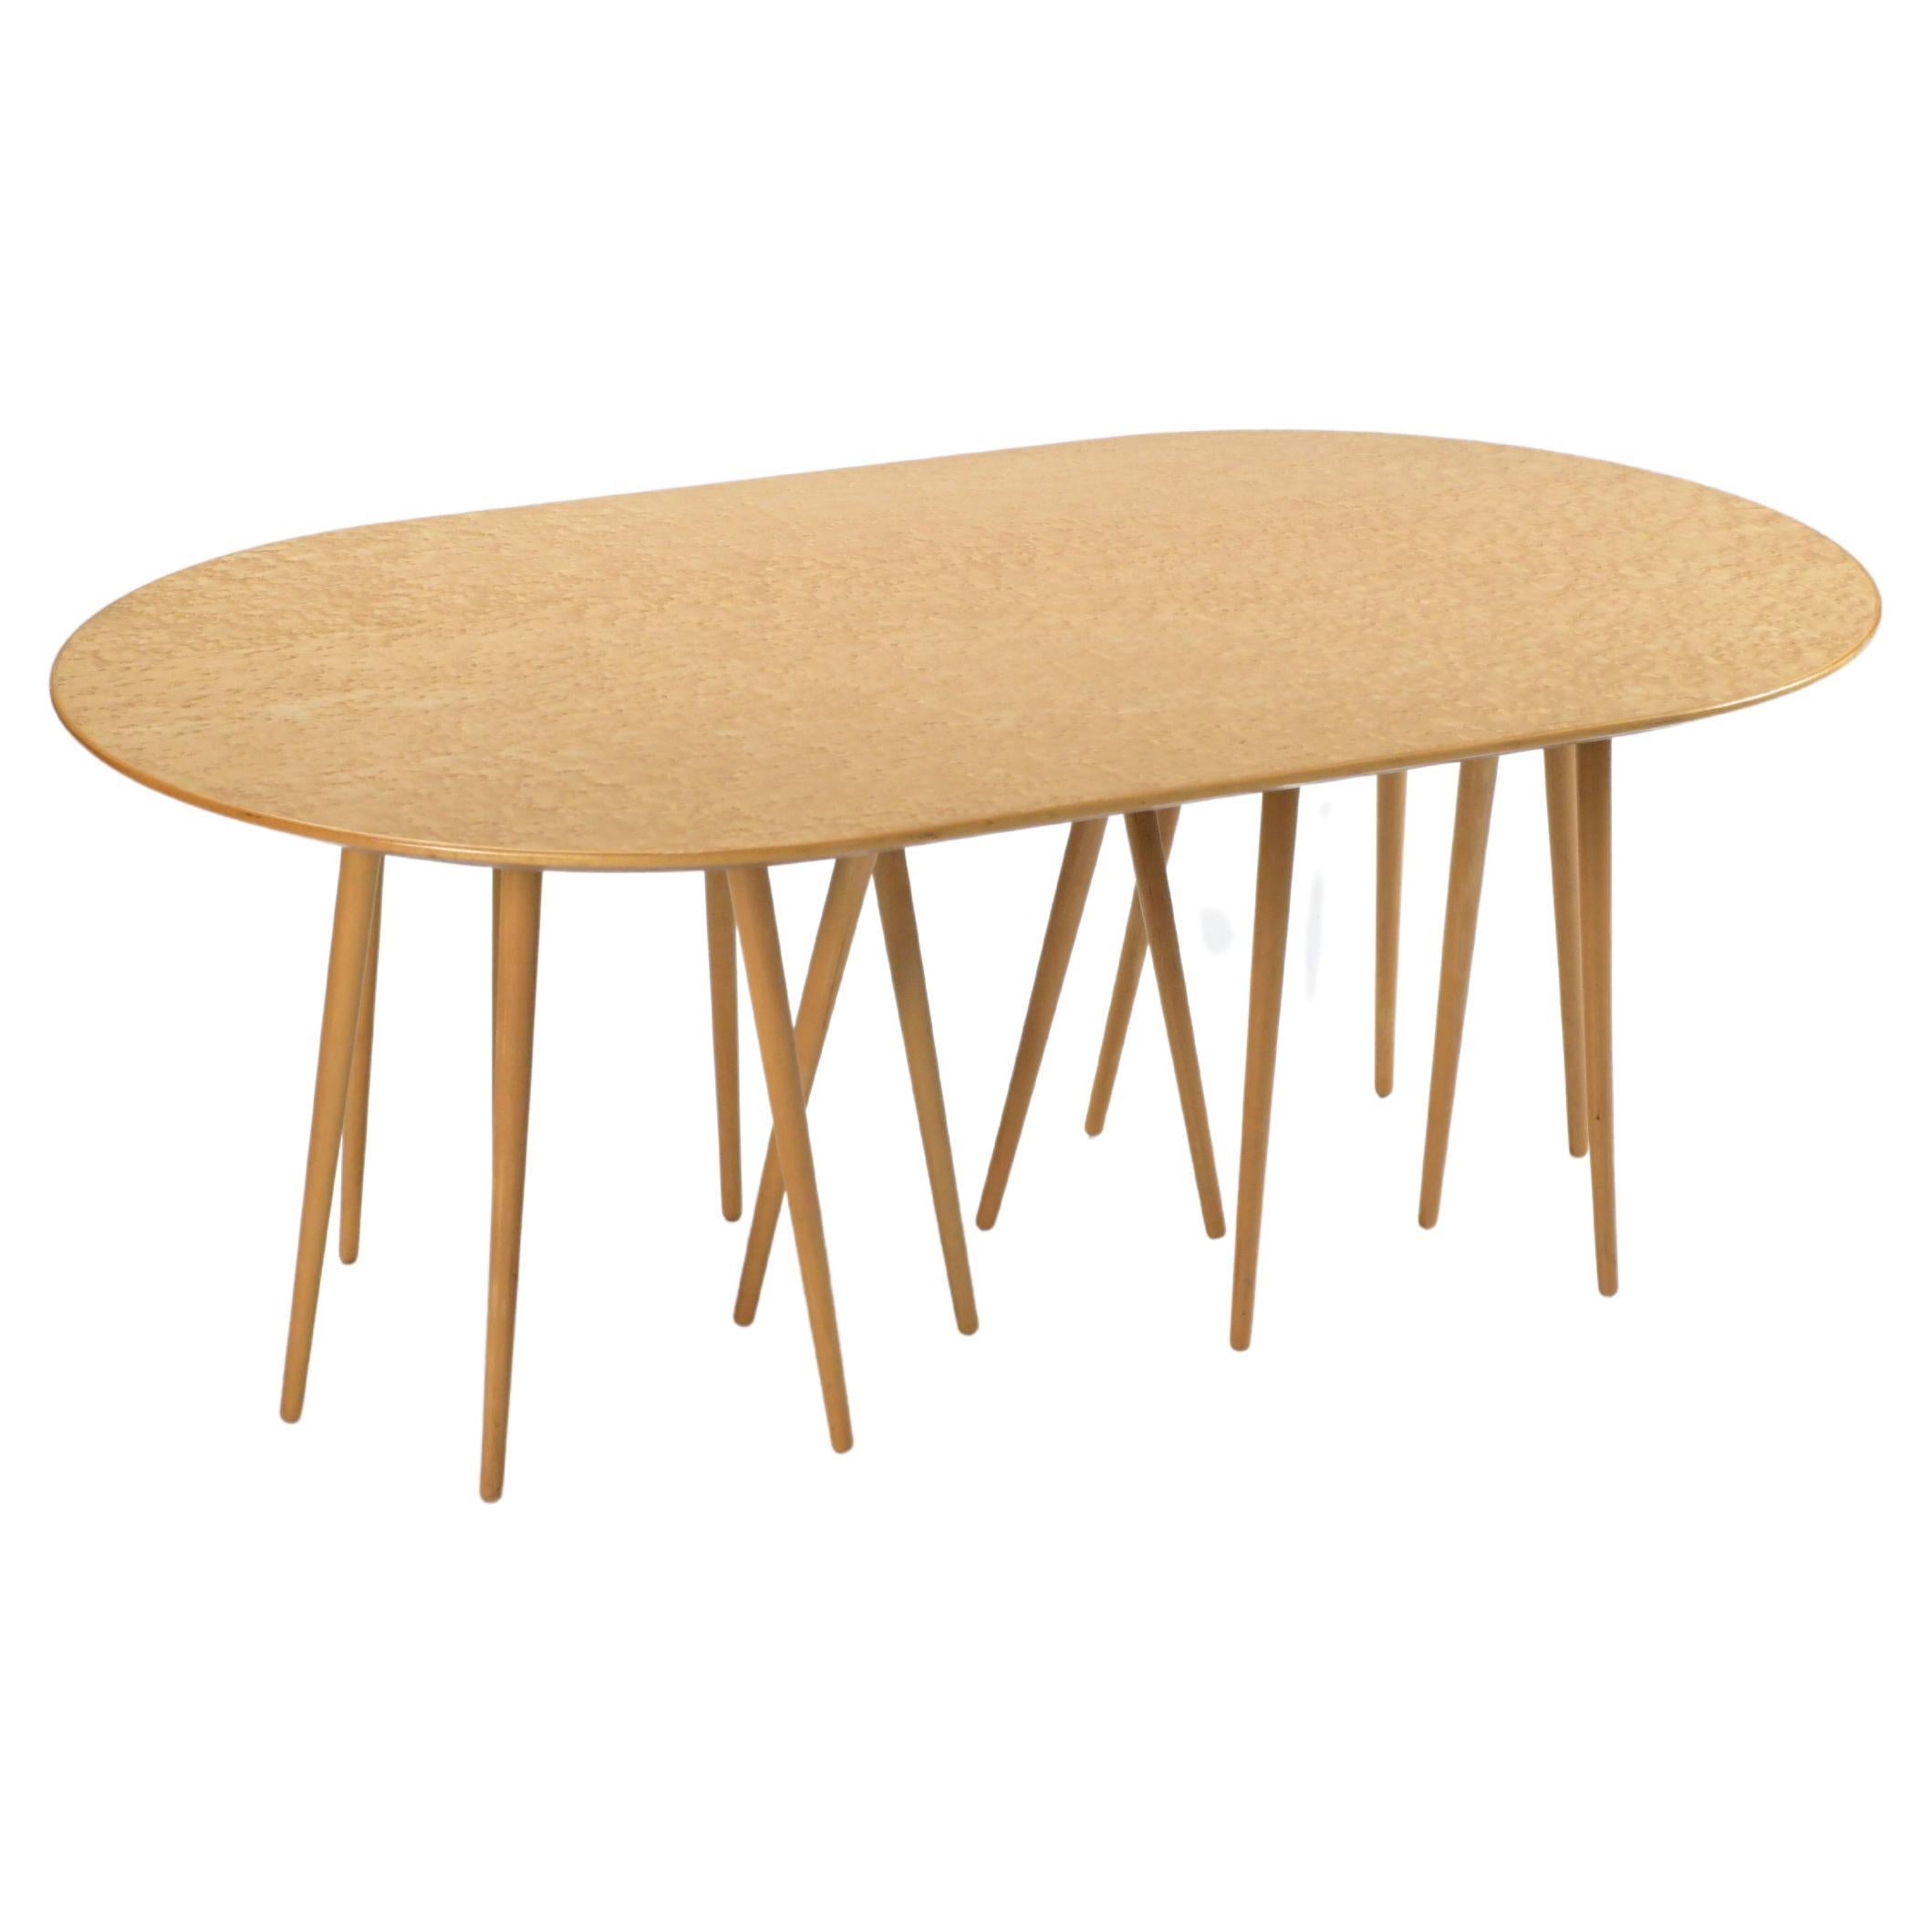 Toothpick Cactus Coffee Table by Lawrence Laske for Knoll 